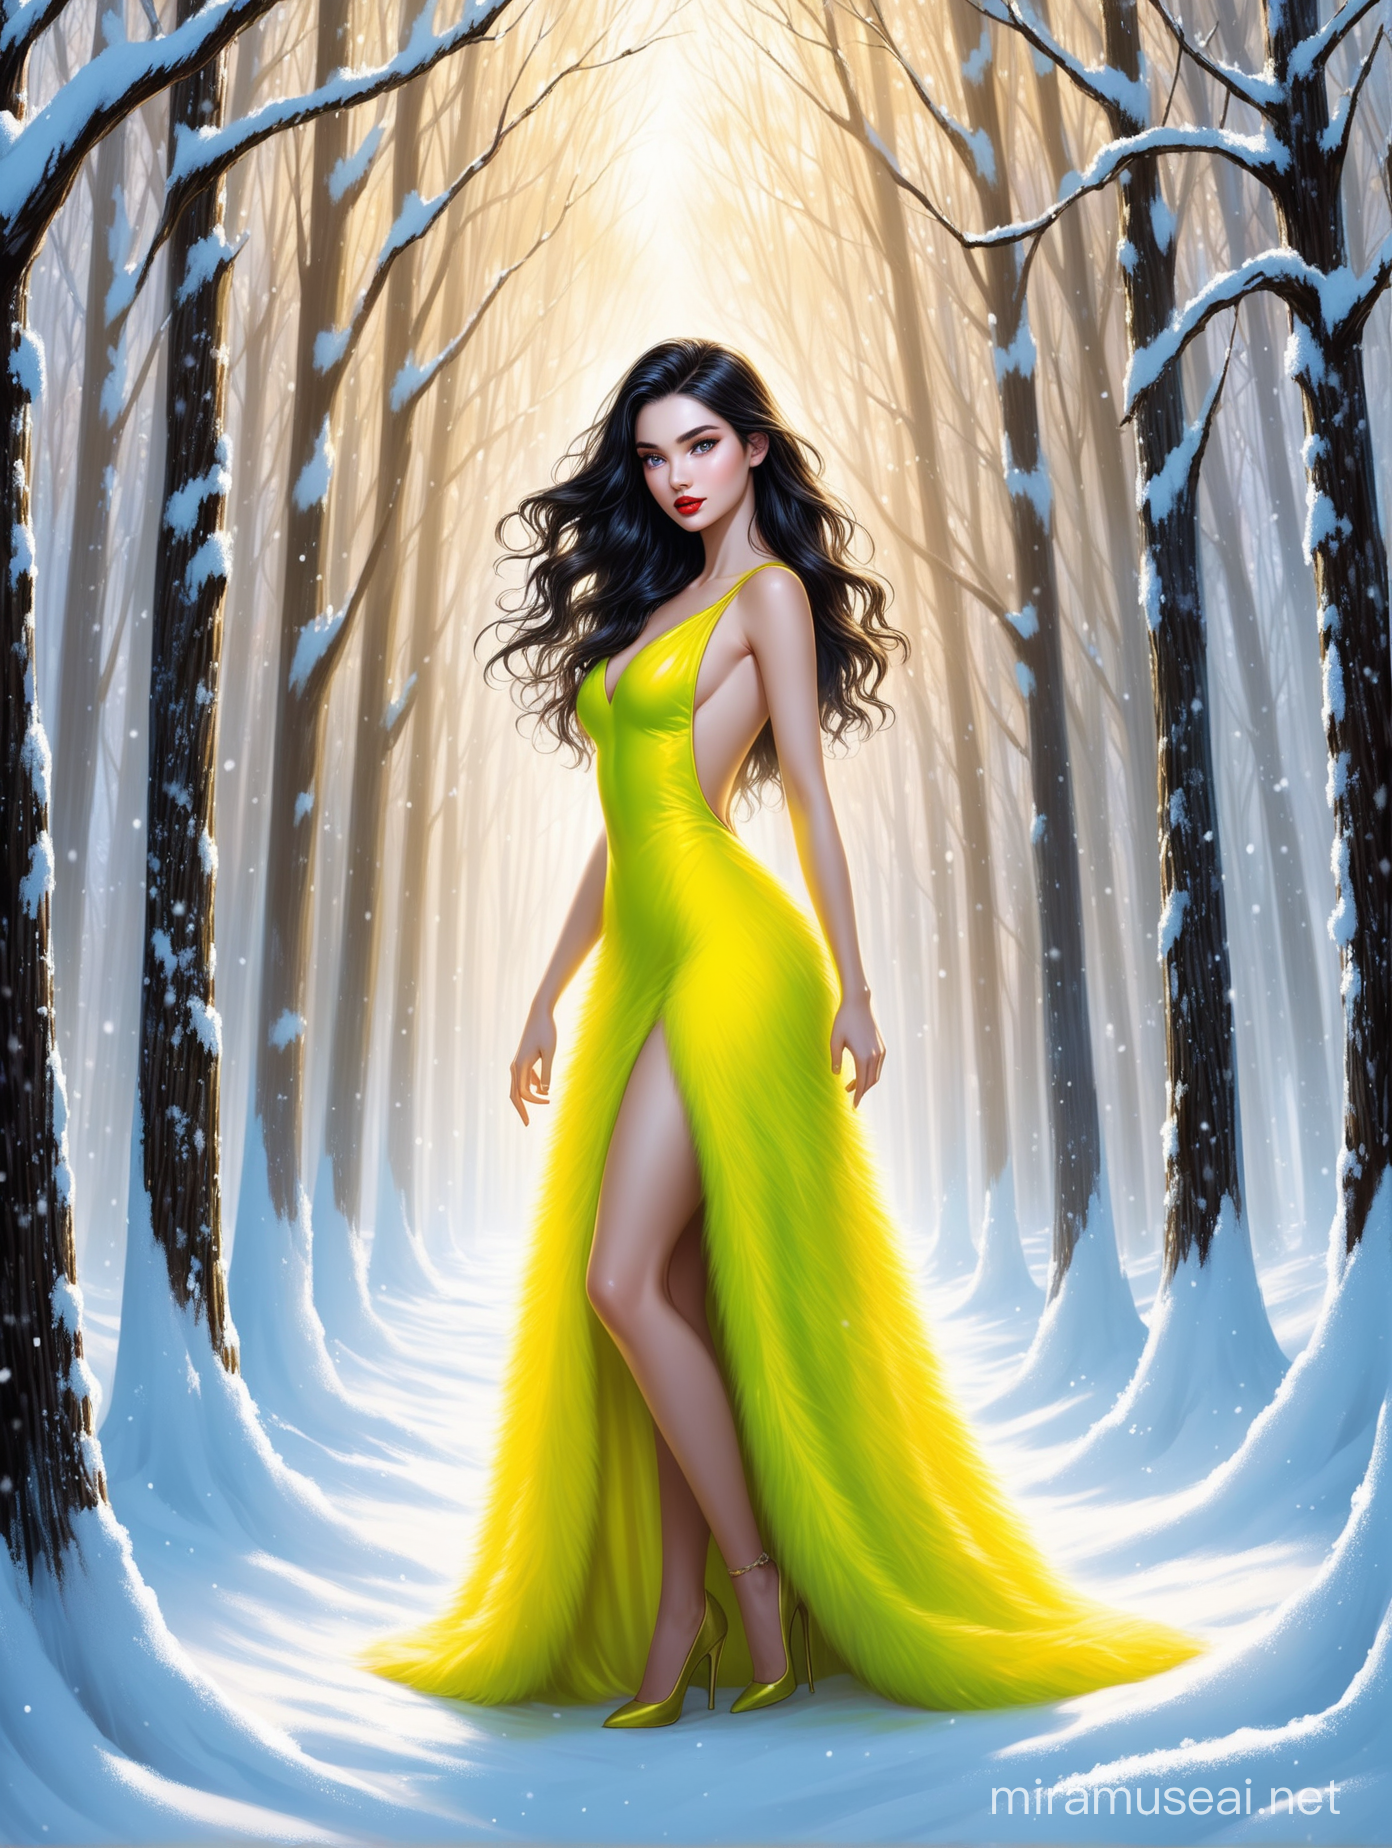 Aivision, full body of beautiful young women , full red lips,prety eyes, black hair. In shining snow - white , fur long yellow dress with open back , shining forest around . fairy tale , realistic facial features . Realistic hair texture,elegant , crispy quality Federico Bebber's expressive, strong neon colors